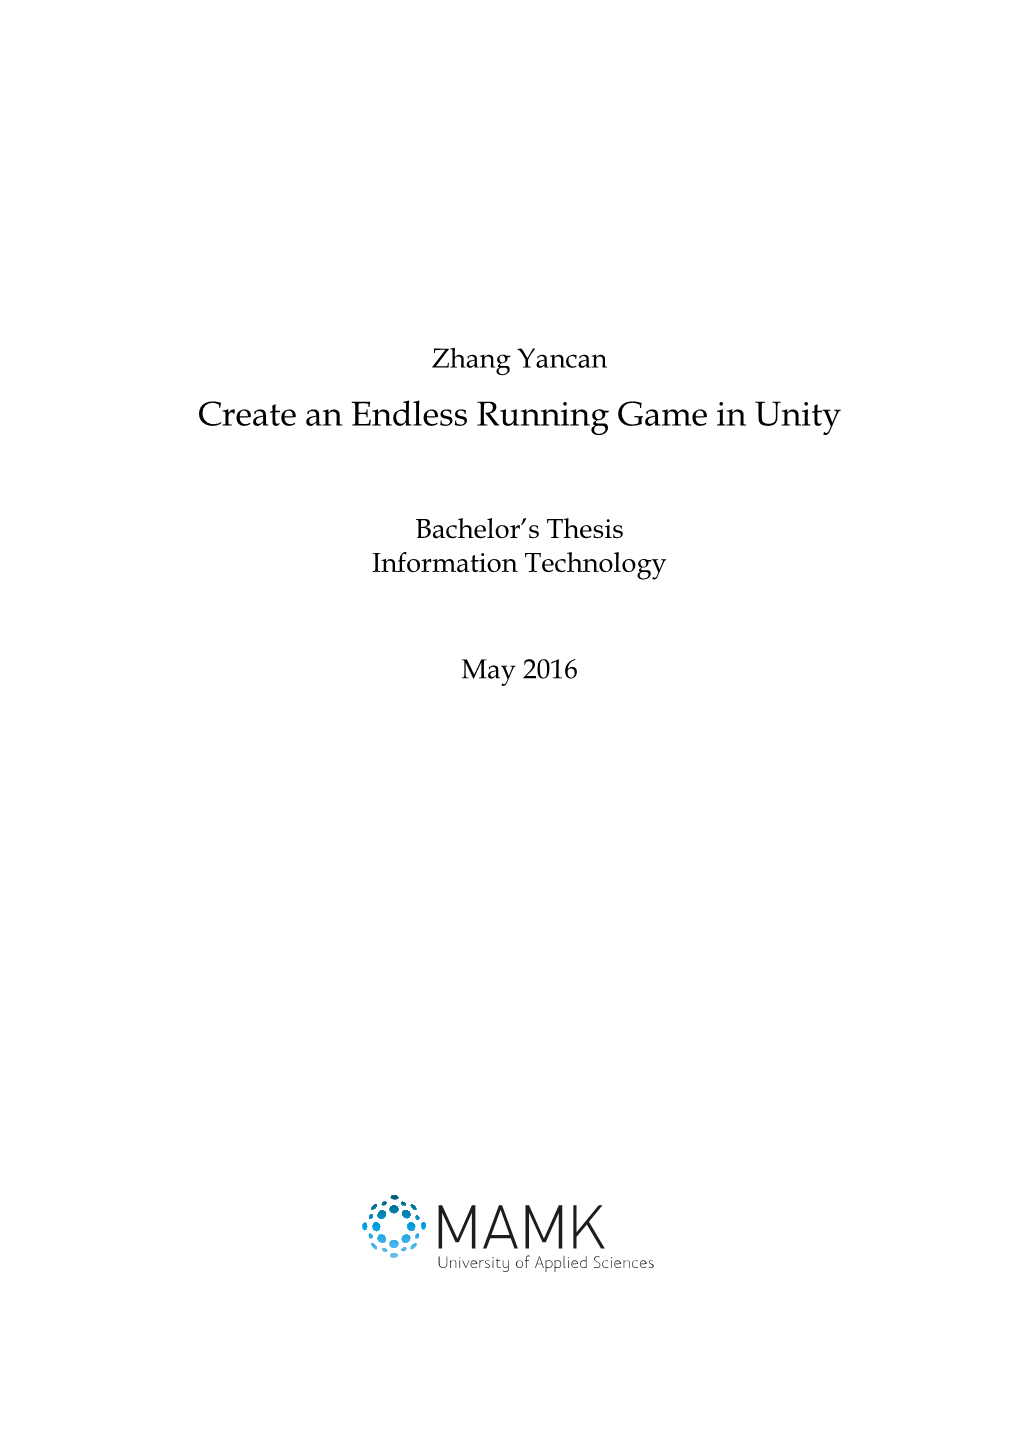 Create an Endless Running Game in Unity